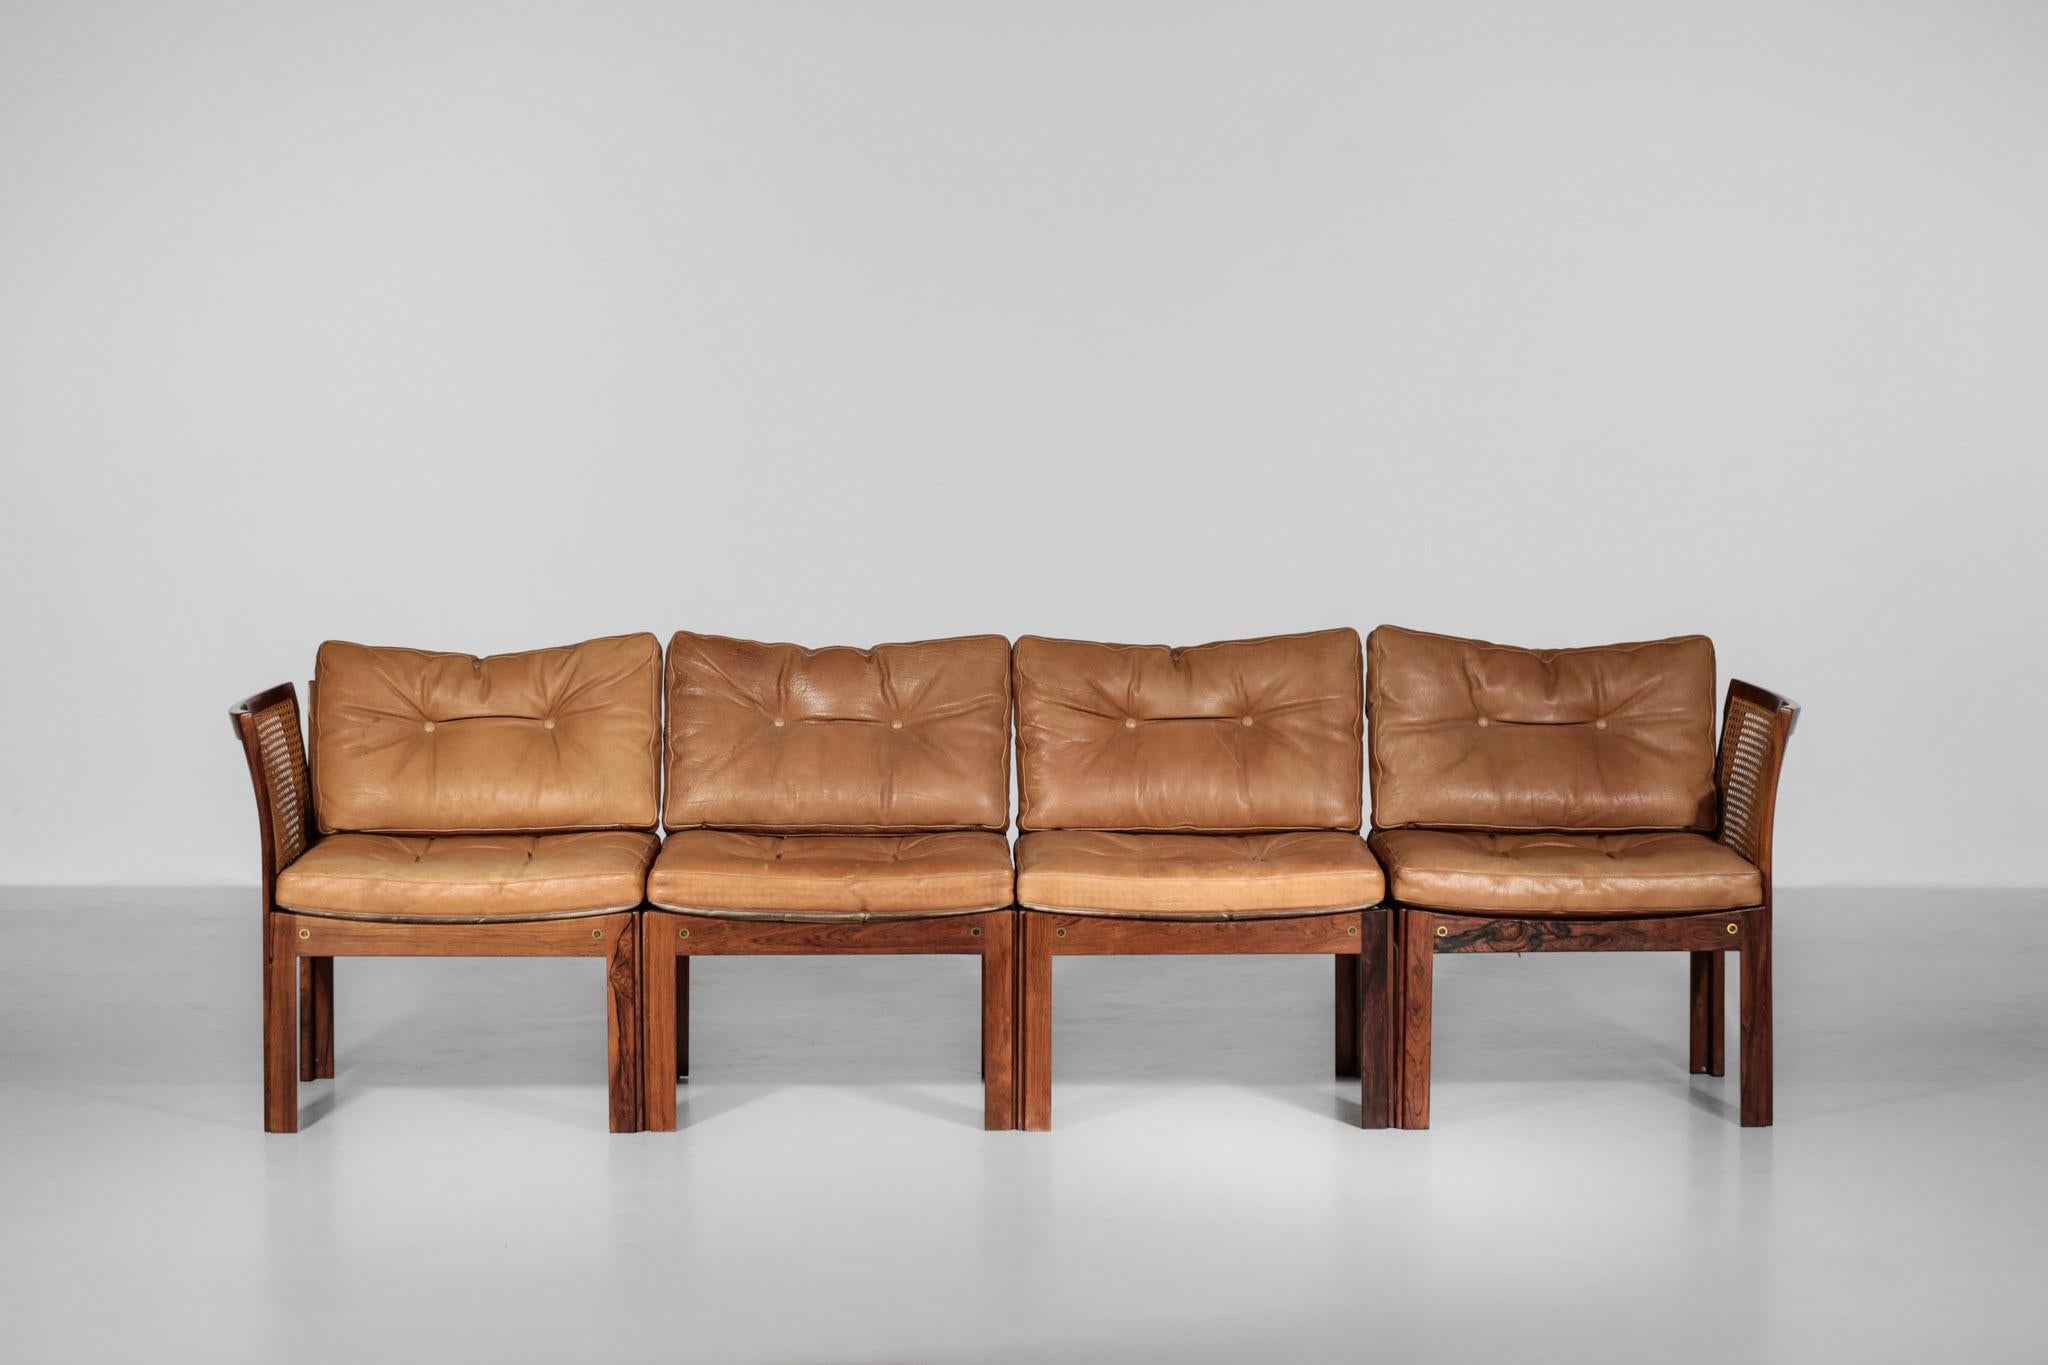 Danish Illum Wikkelso Leather Sofa in Rosewood and Woven Rattan Cane For Sale